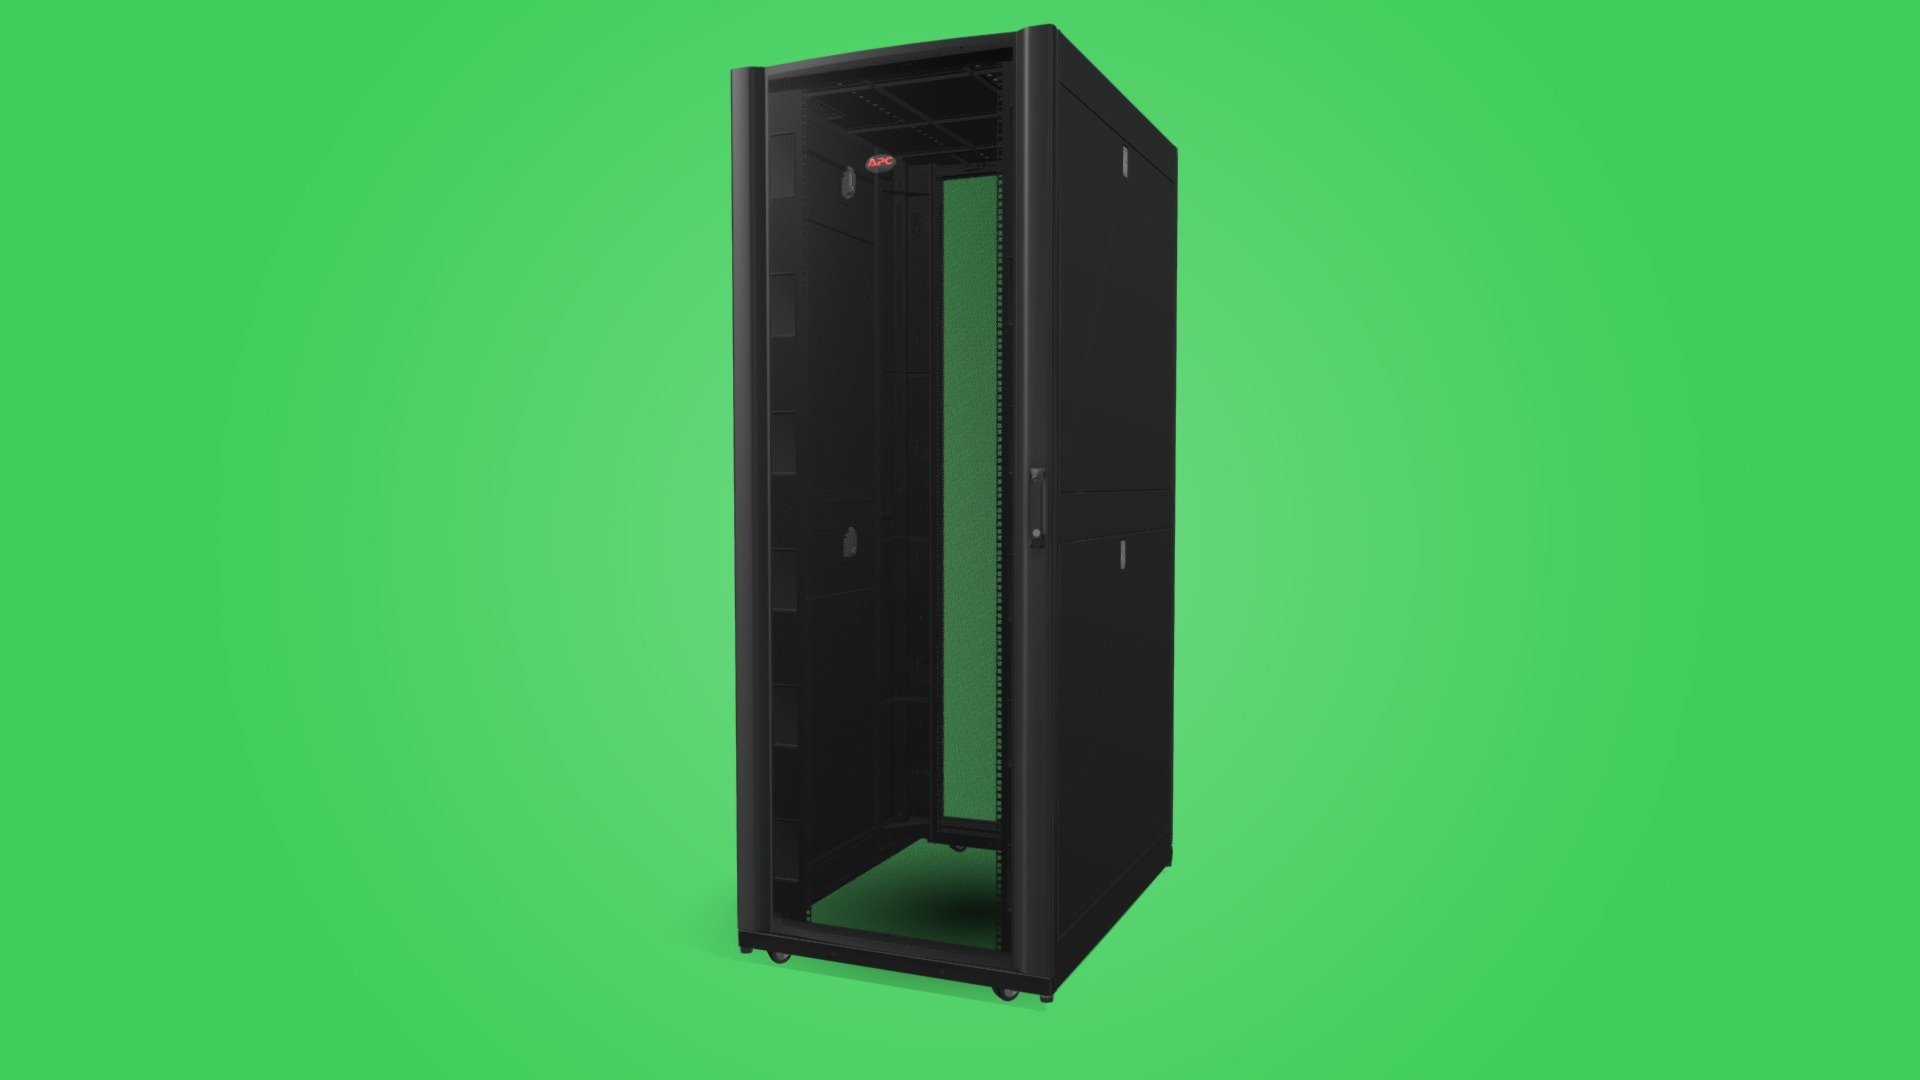 Meet the NetShelter AR3150.

NetShelter SX 42U 750mm Wide x 1070mm Deep Enclosure with Sides Black.

Wide enclosure with increased cable management options for high density server and networking applications. 42U height to easily roll through doorways.

To learn more about this product and other Rack Systems offers, visit: https://www.apc.com/shop/us/en/categories/racks-and-accessories/N-1biii1l - NetShelter SX Enclosures - 3D model by Schneider Electric 3d model